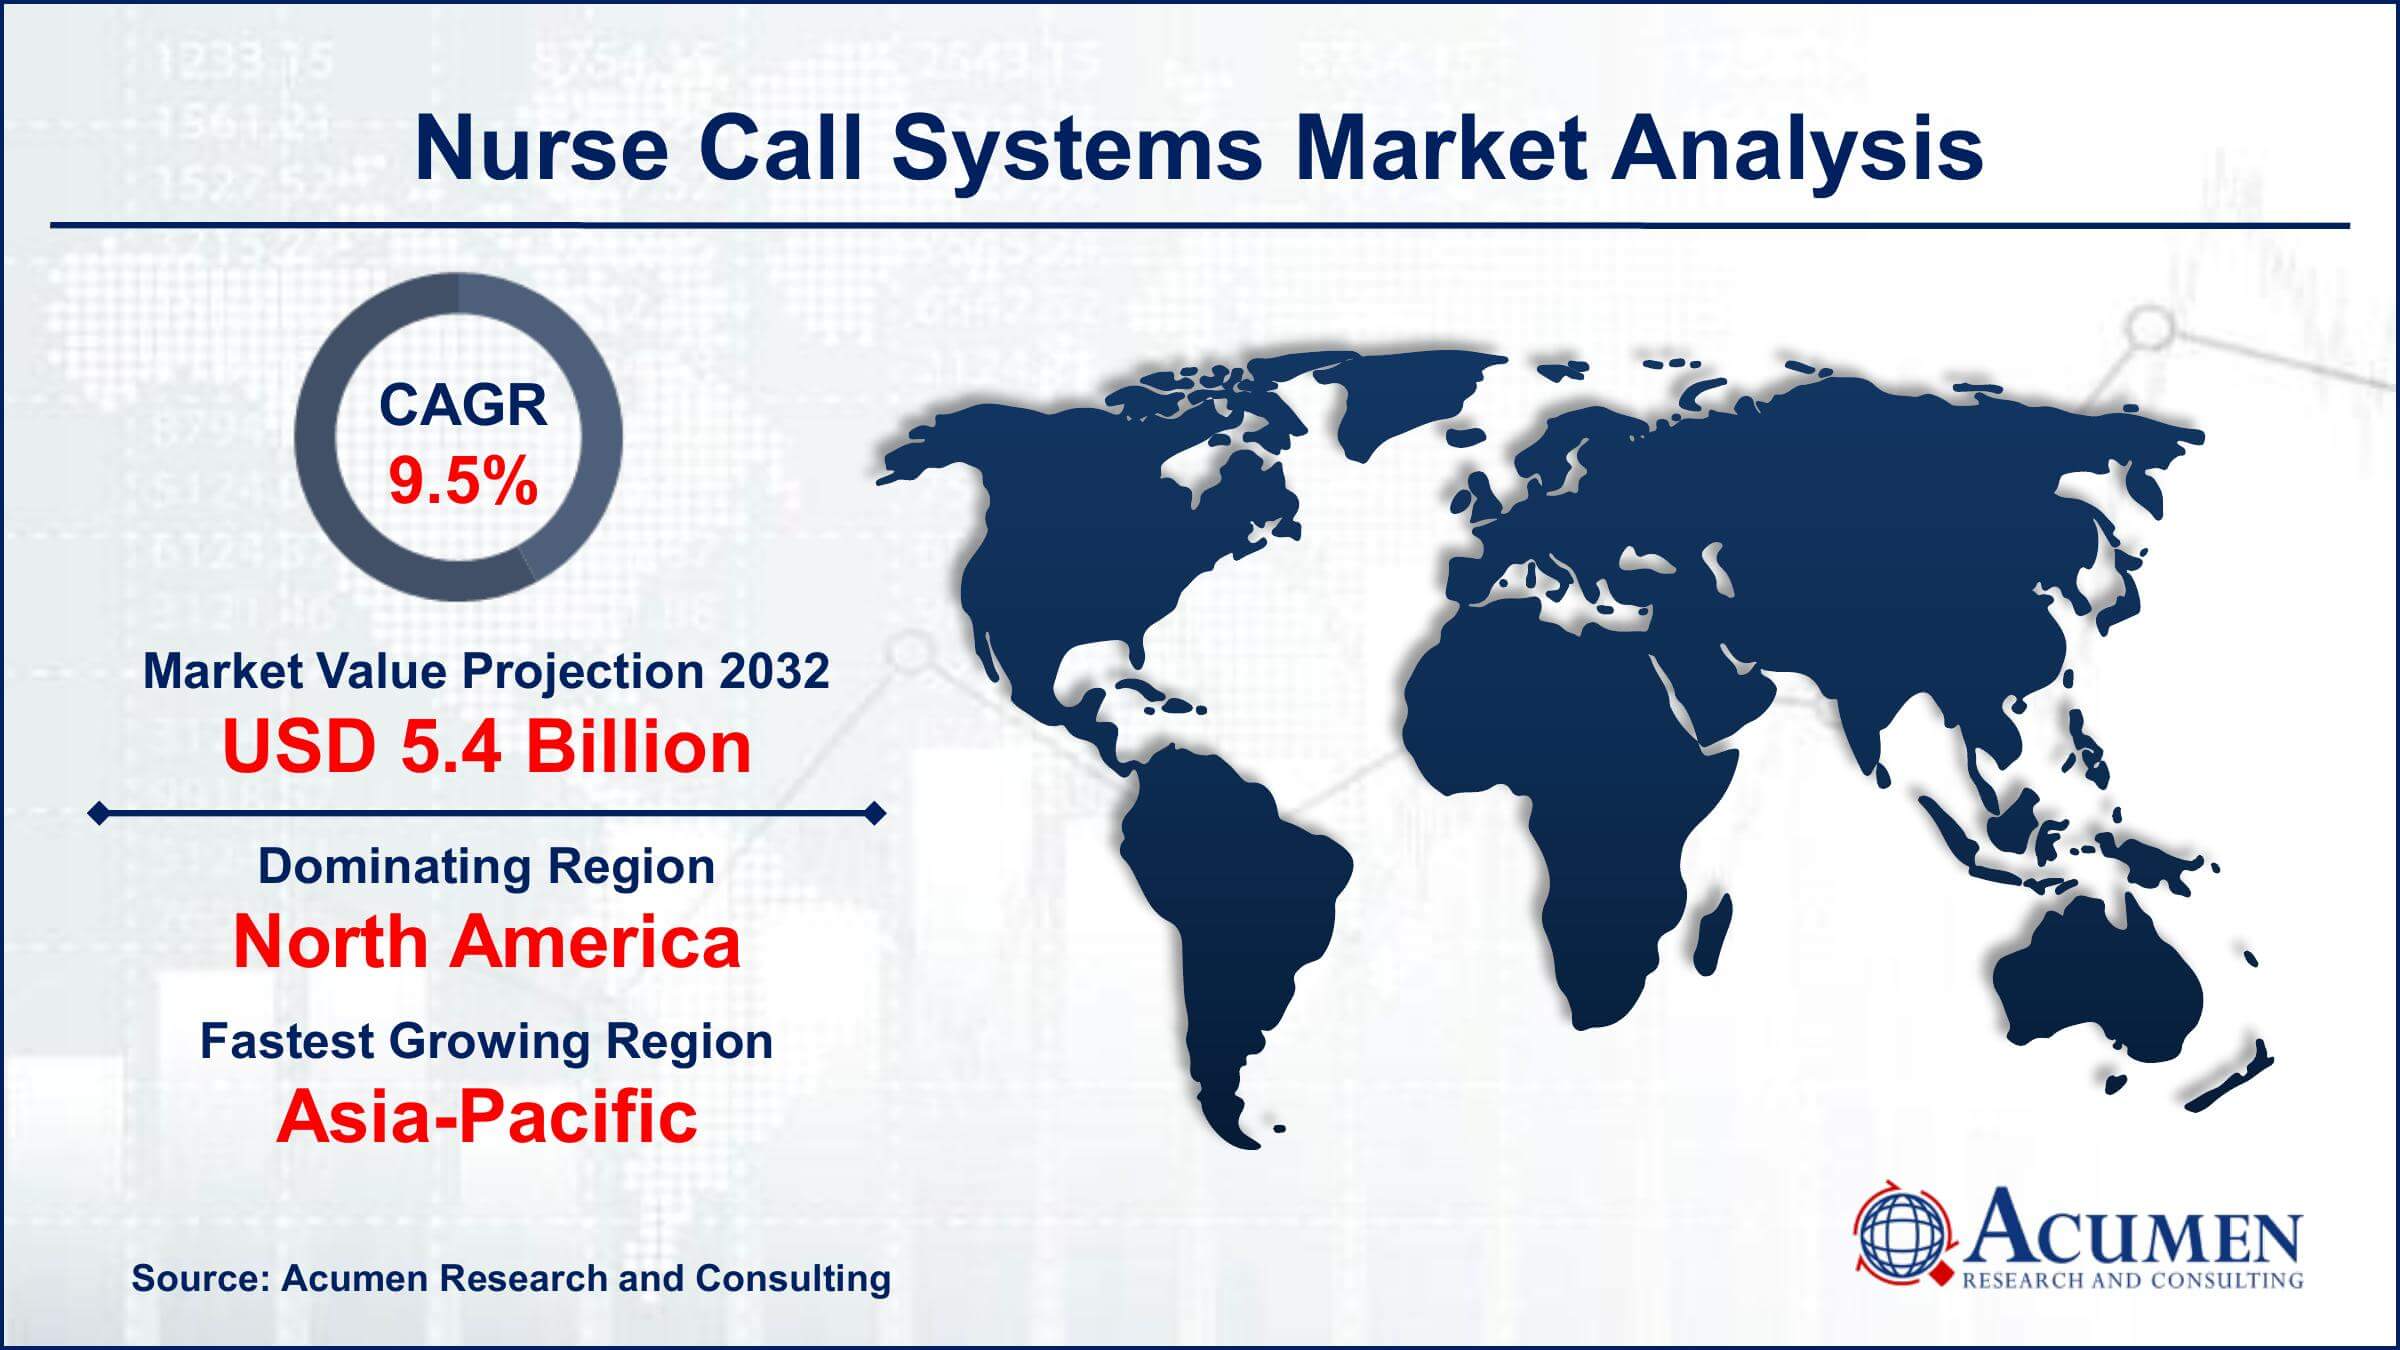 Global Nurse Call Systems Market Trends